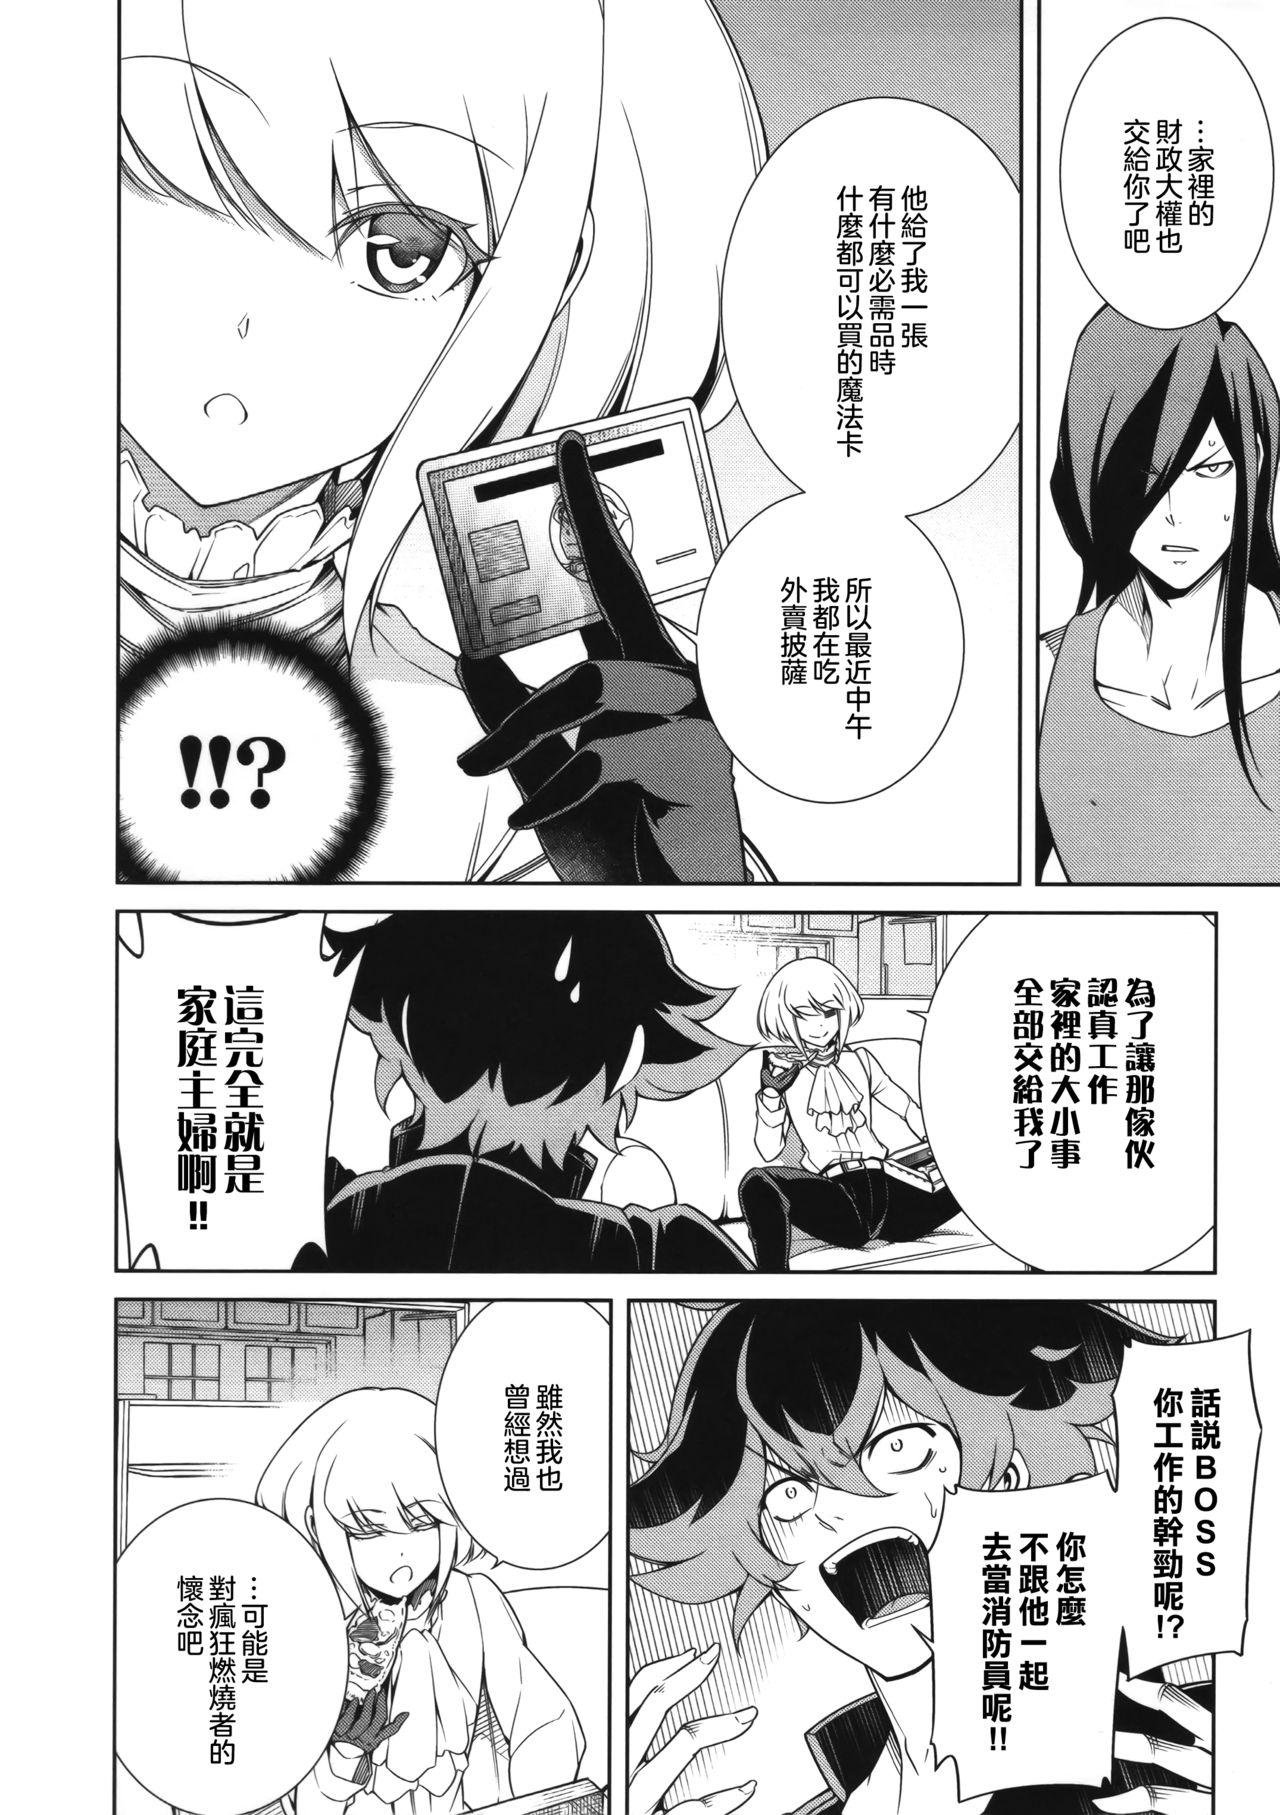 Handjob PROMISED PROPOSE - Promare Insertion - Page 10